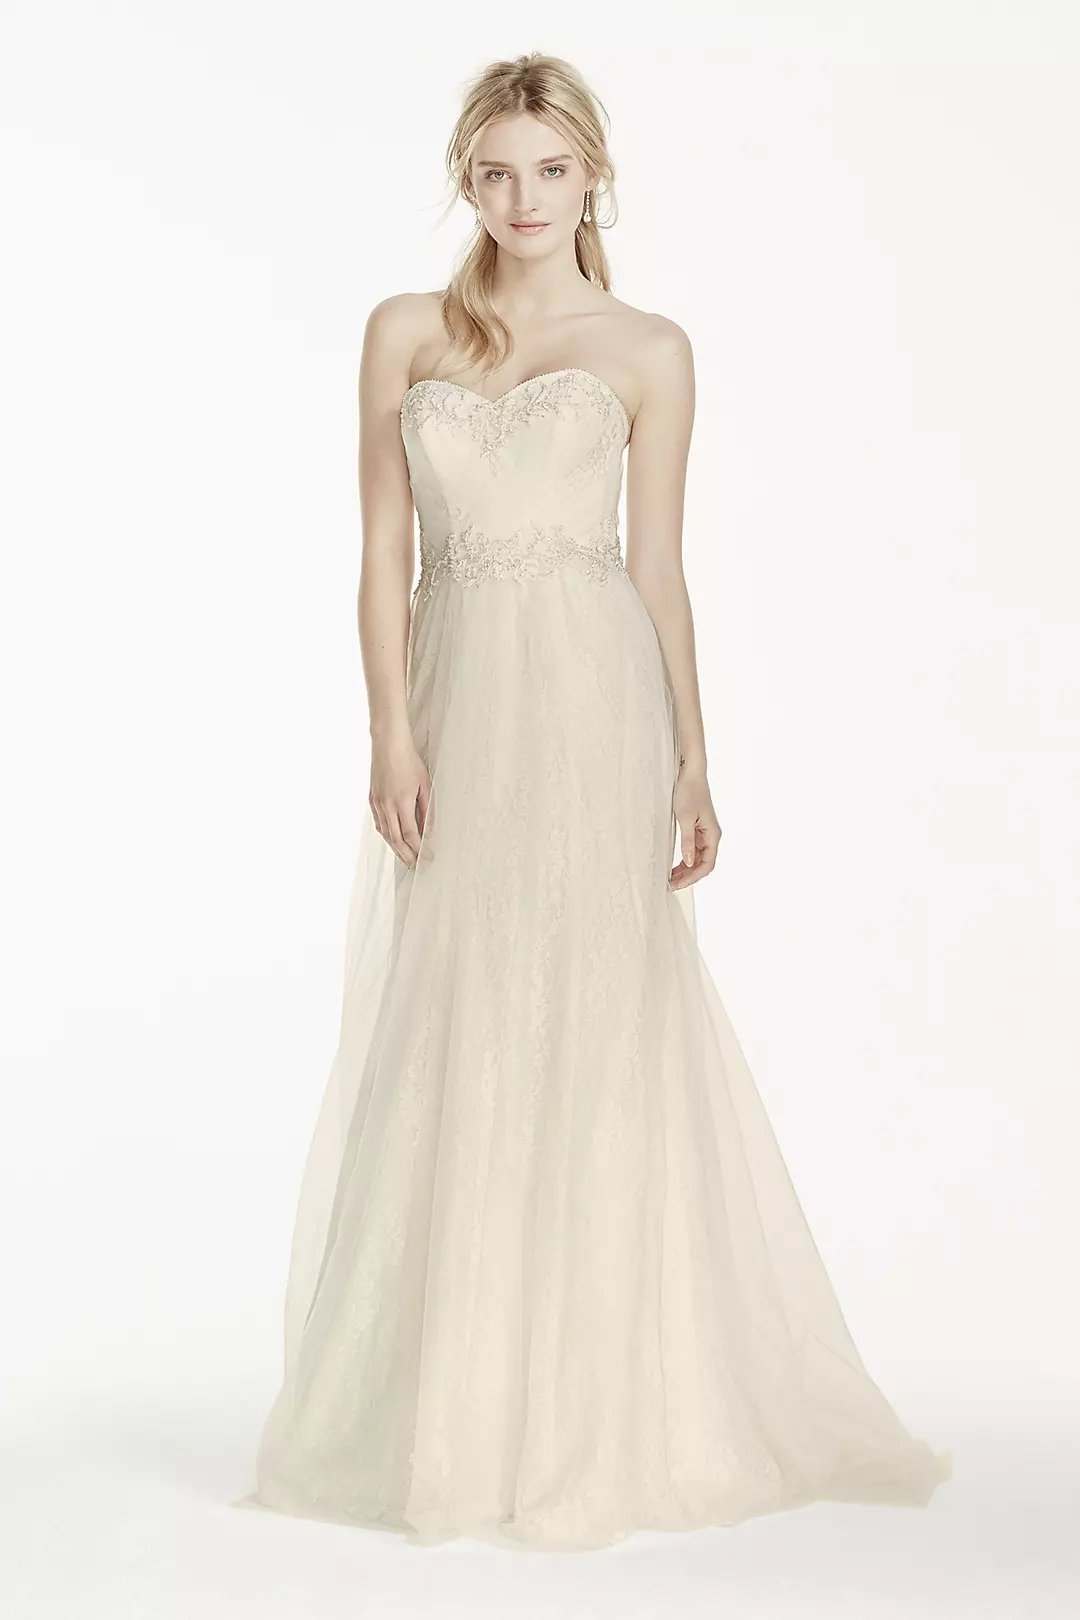 Strapless Tulle Over Lace Sheath Wedding Dress Image